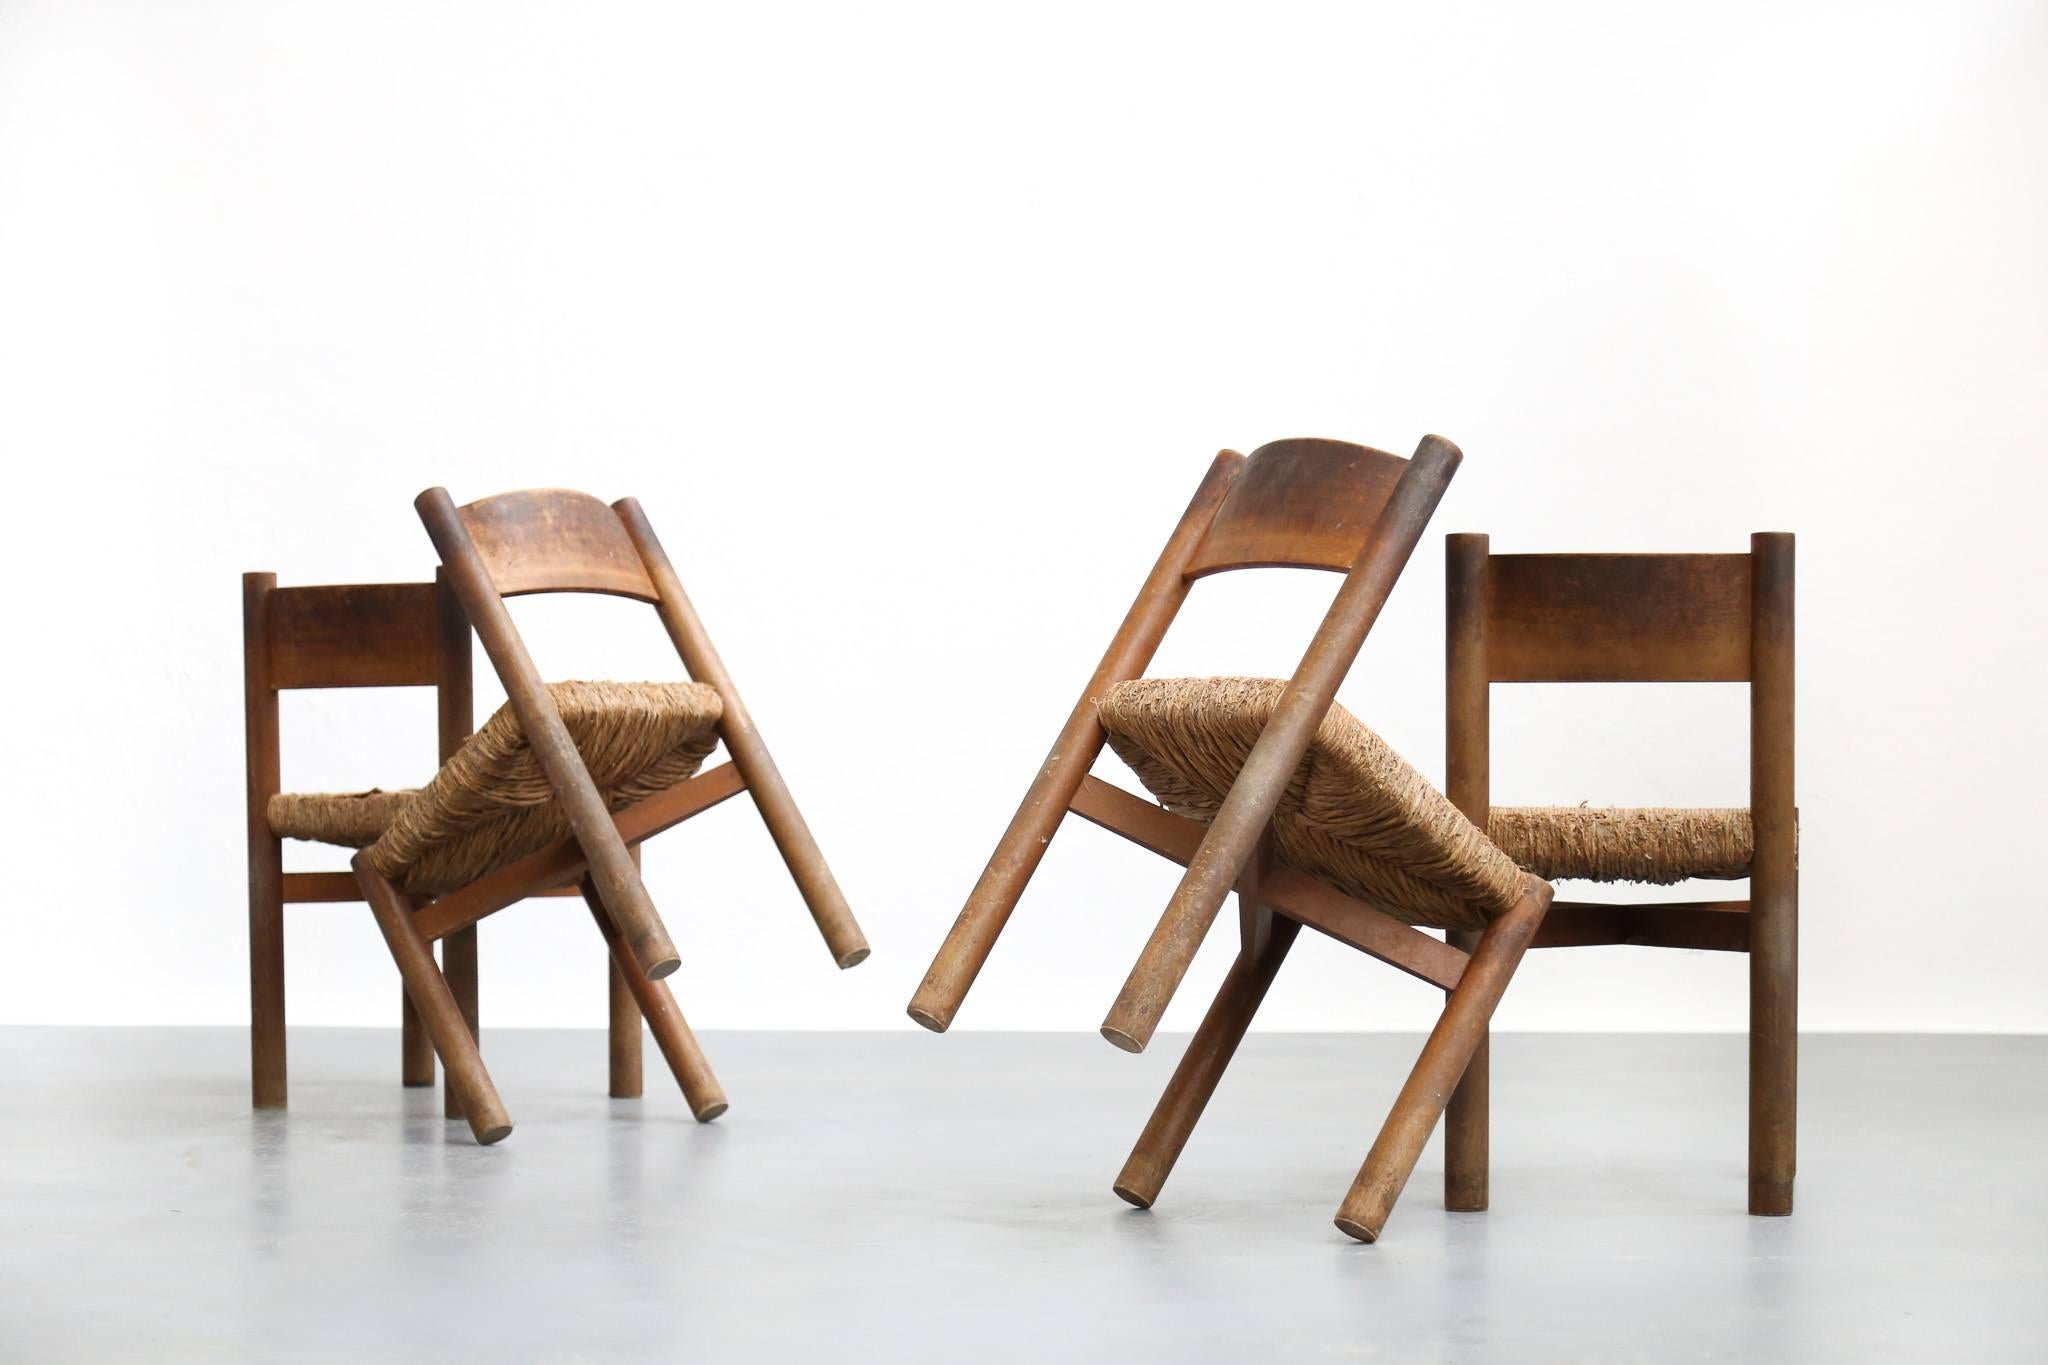 Chairs for Meribel Designed by Charlotte Perriand, French, 1950s Jean Prouvé 1